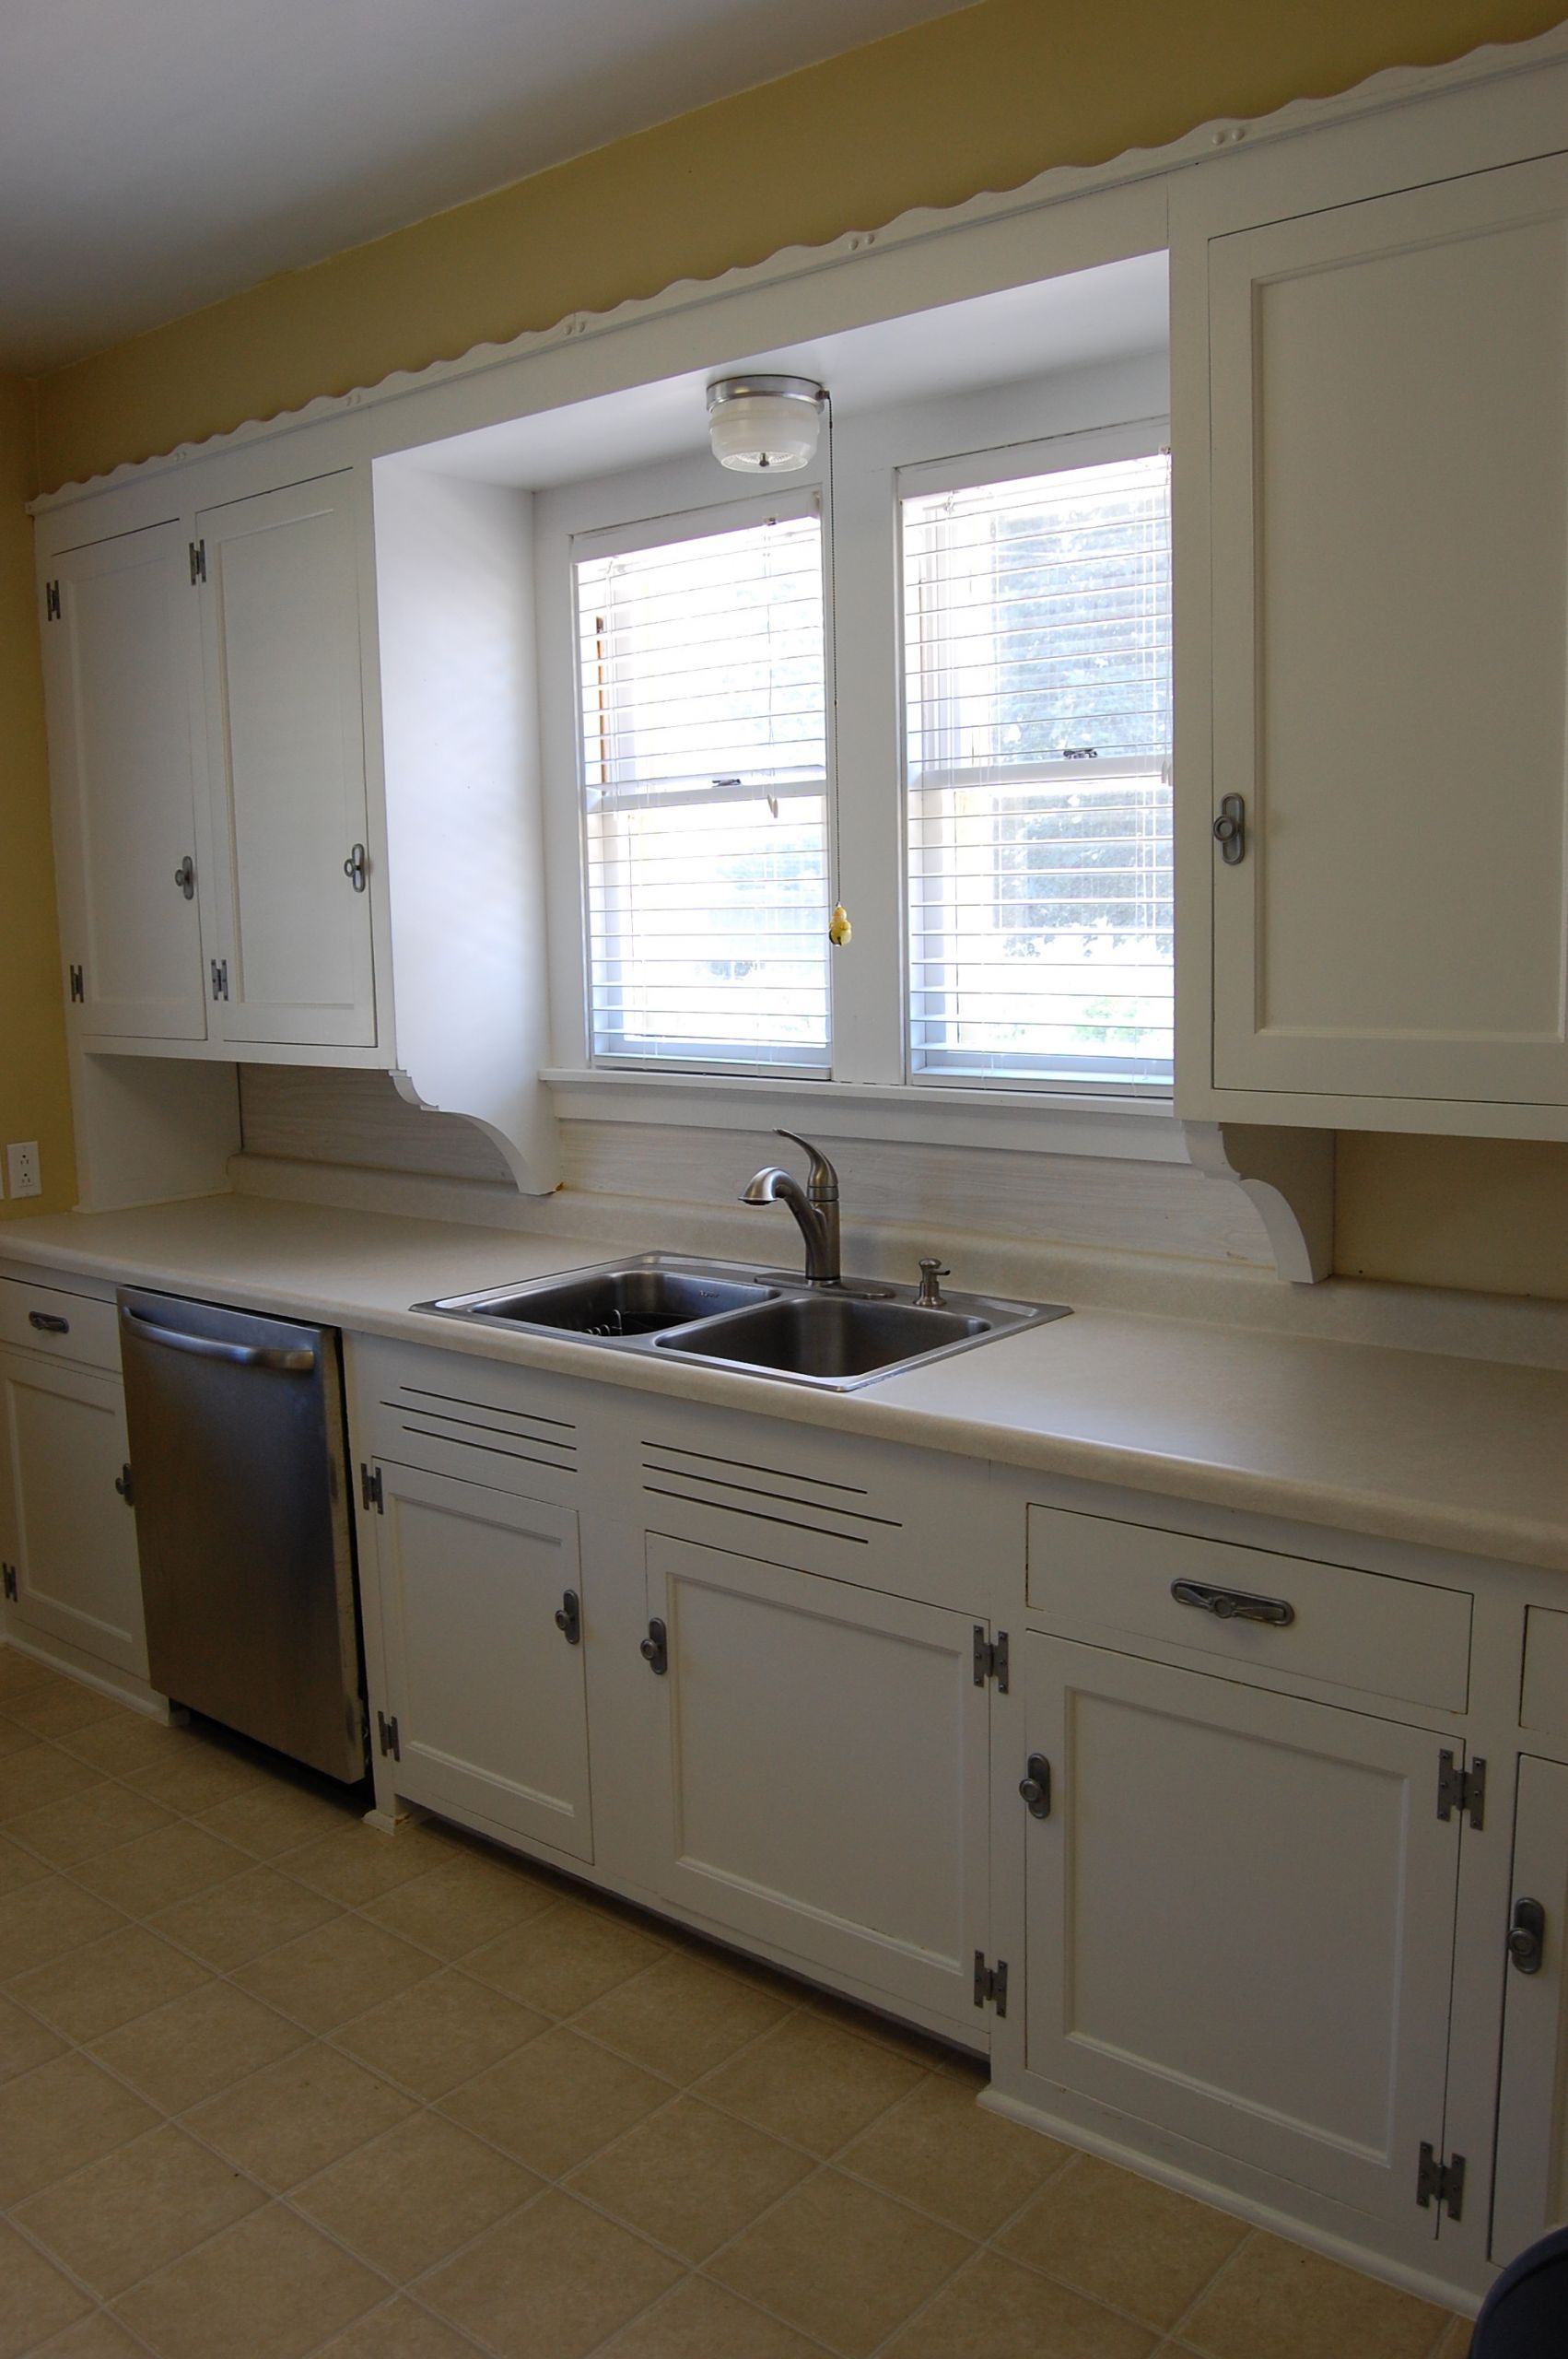 Painting Kitchen Cabinets
 How To Painting Kitchen Cabinets